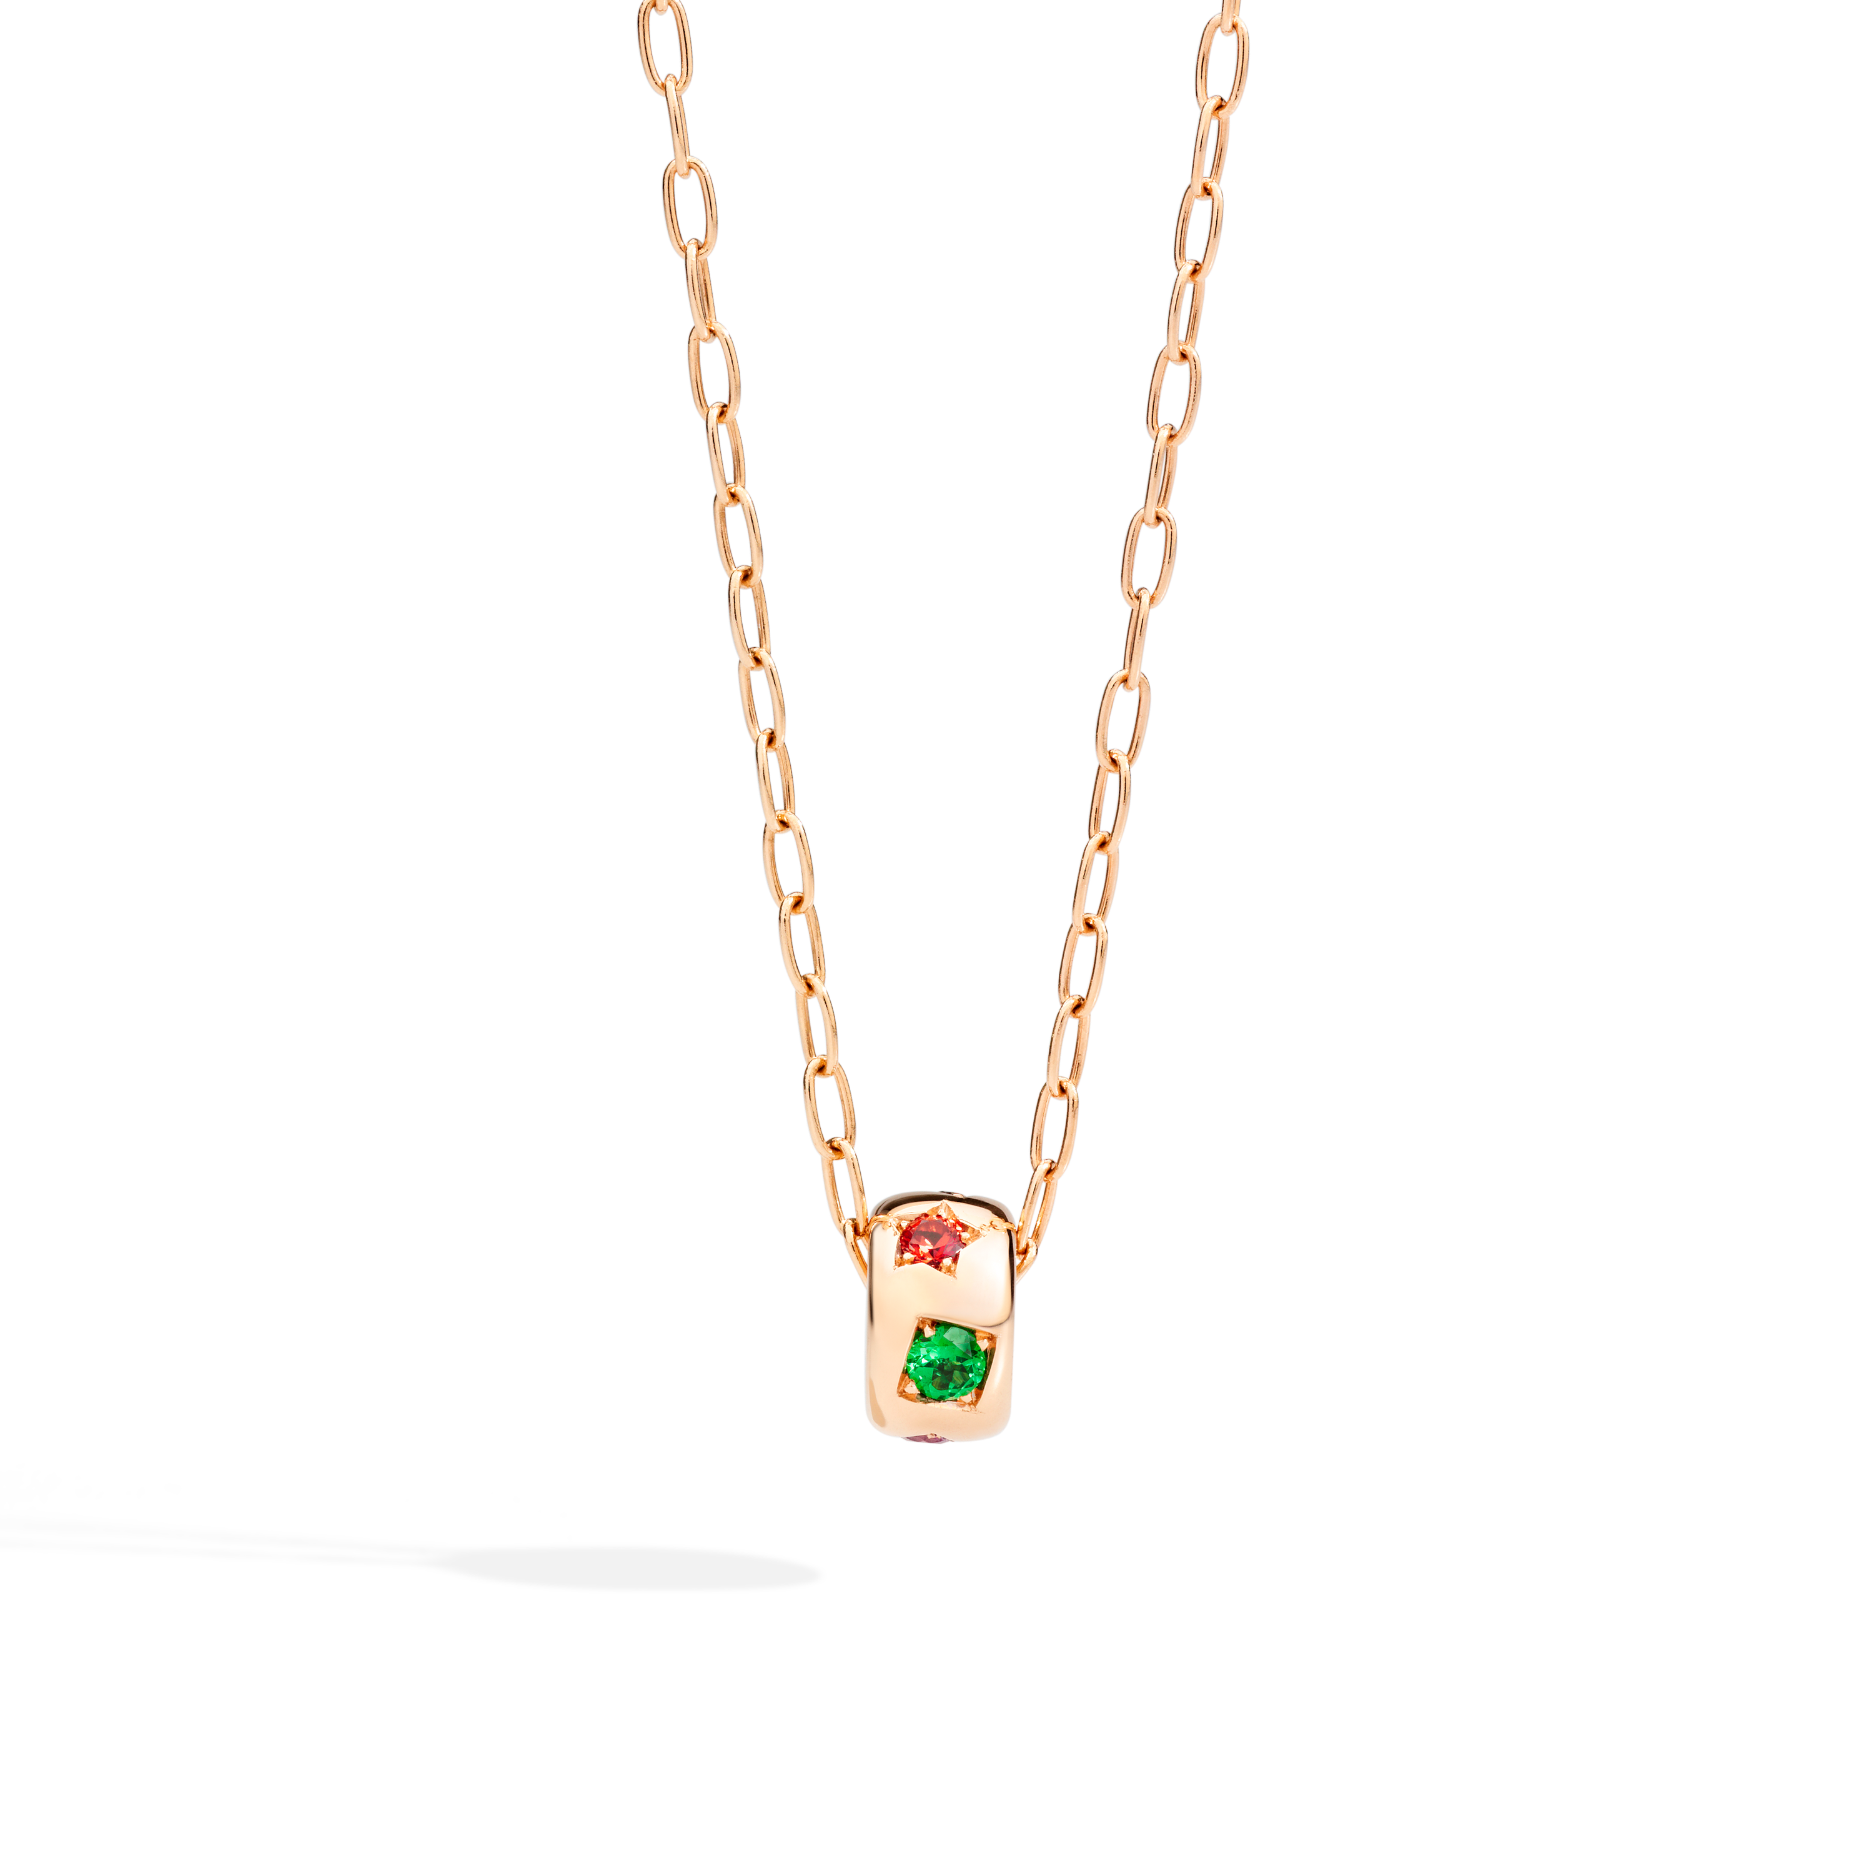 Pomellato Iconica Necklace in 18k Rose Gold with Coloured Gemstones - Orsini Jewellers NZ